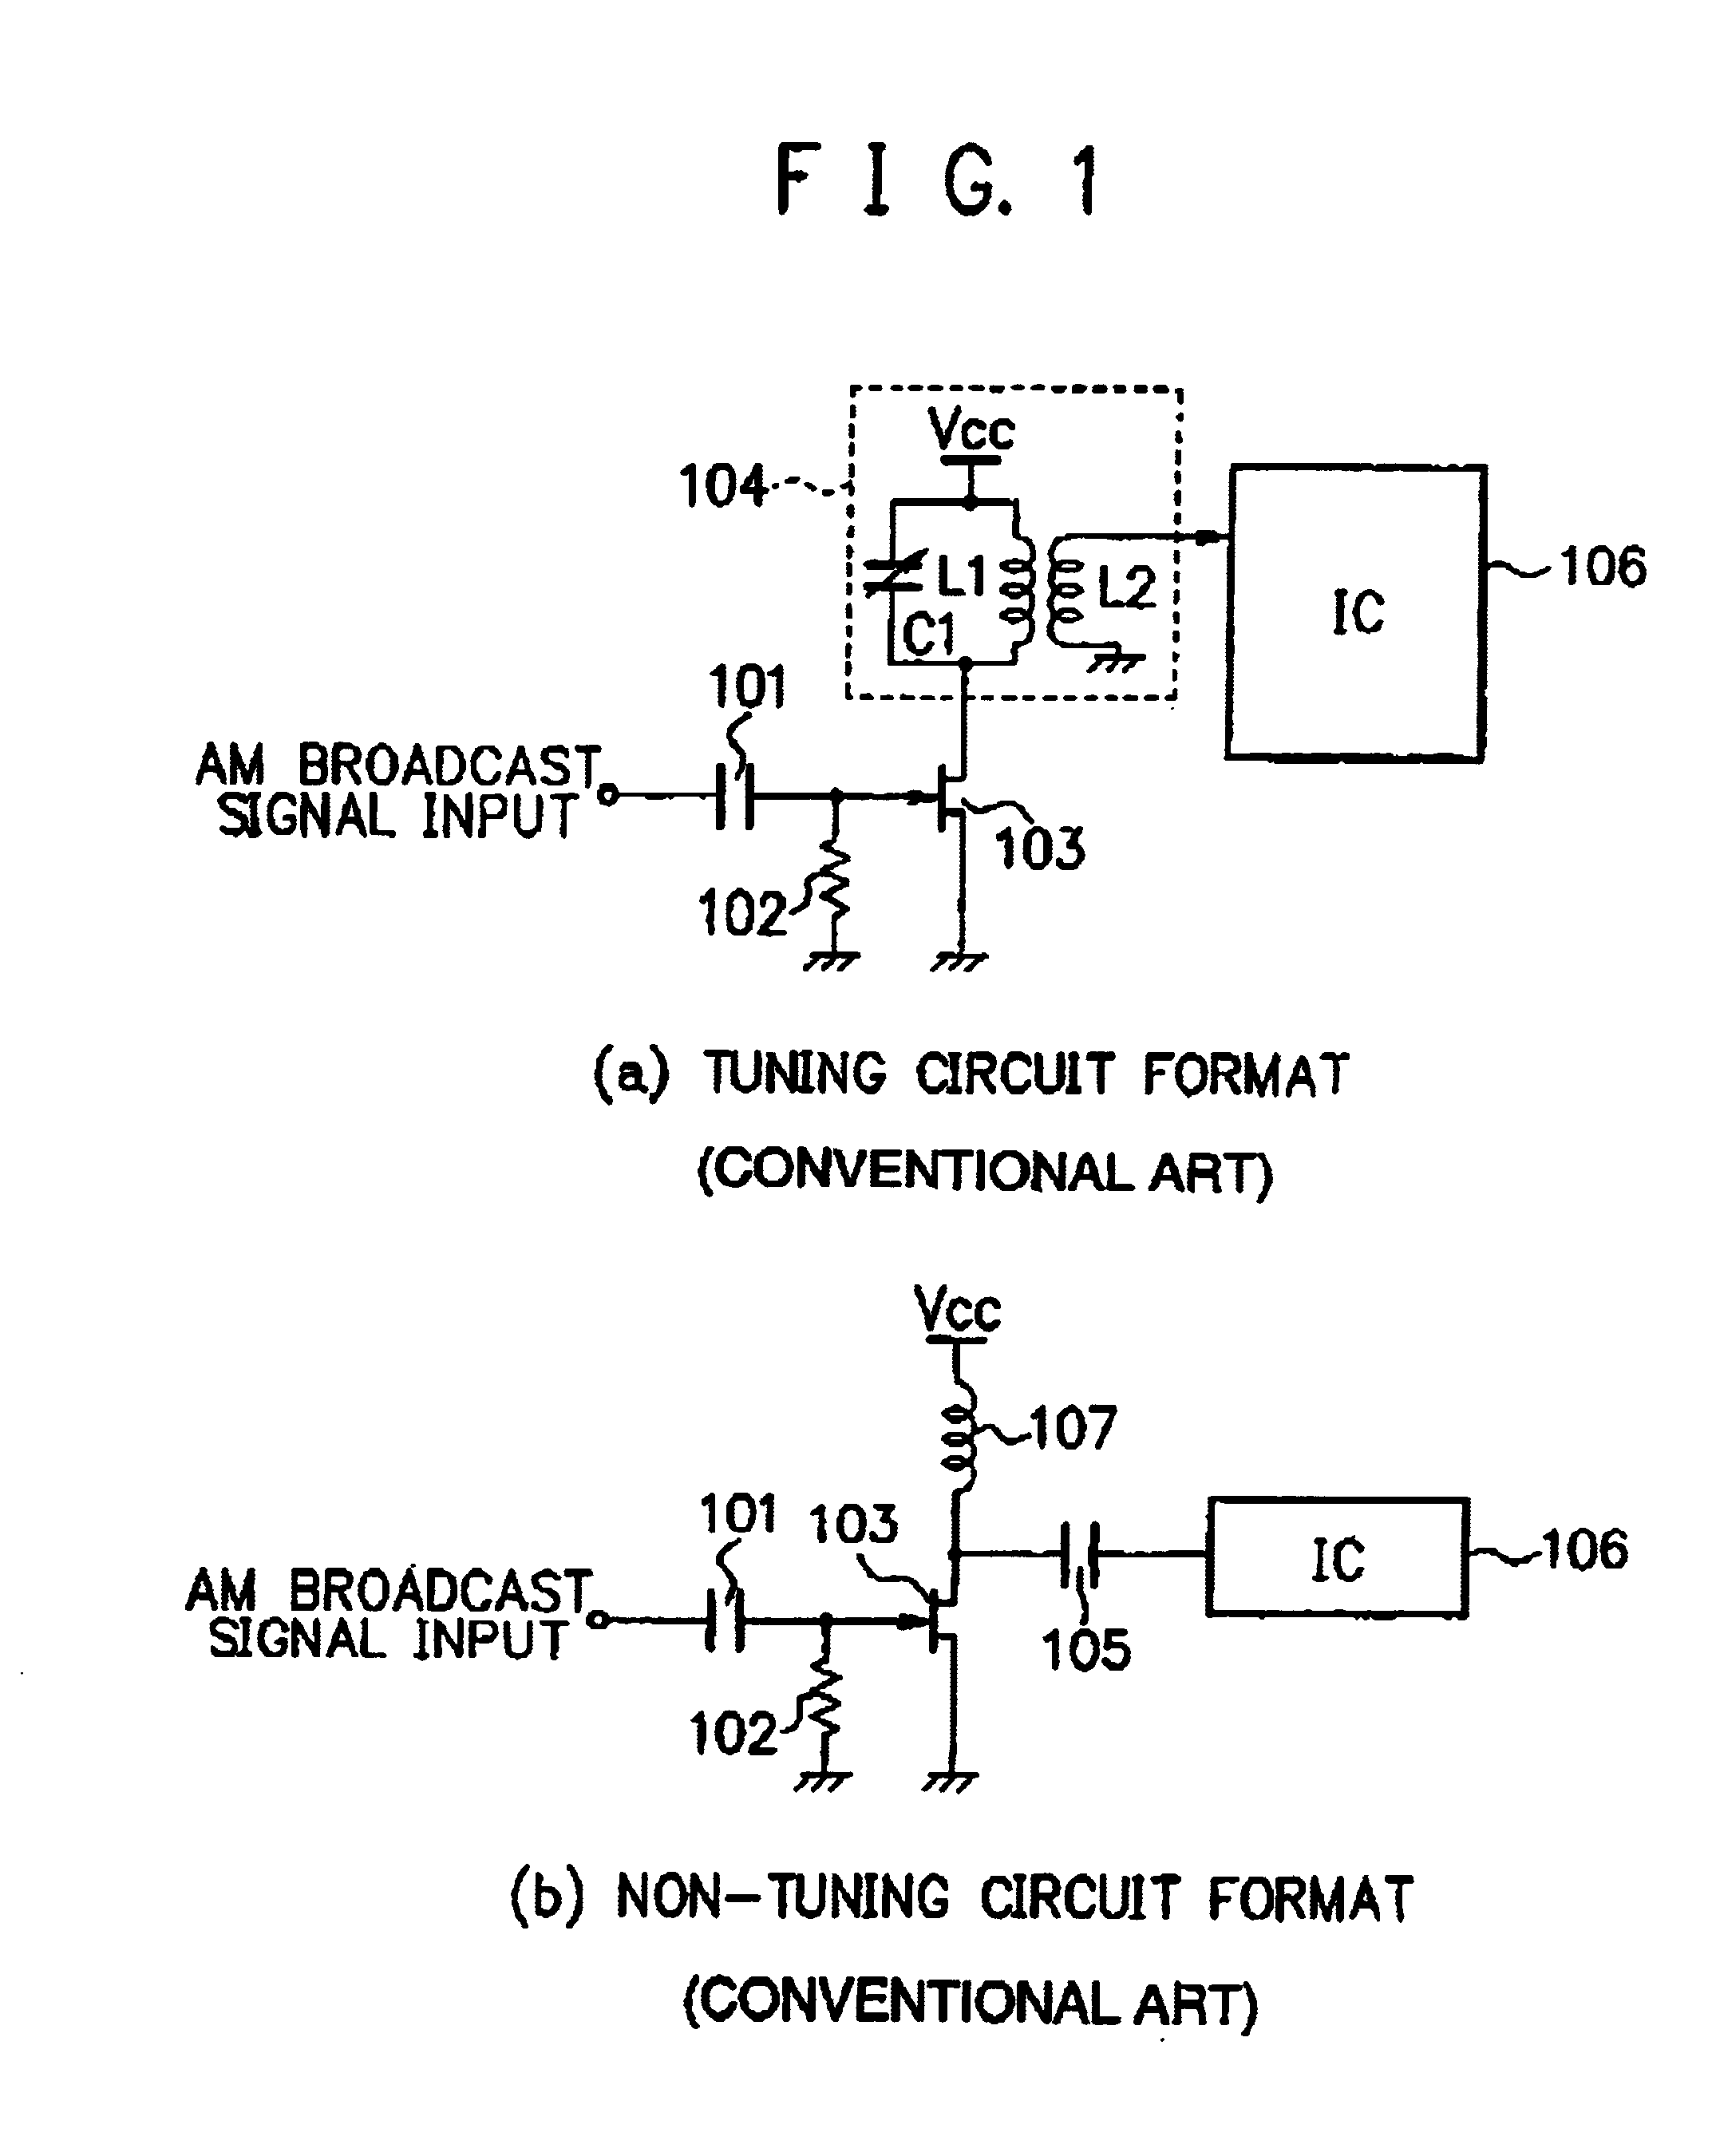 Amplifier circuit for AM broadcasting